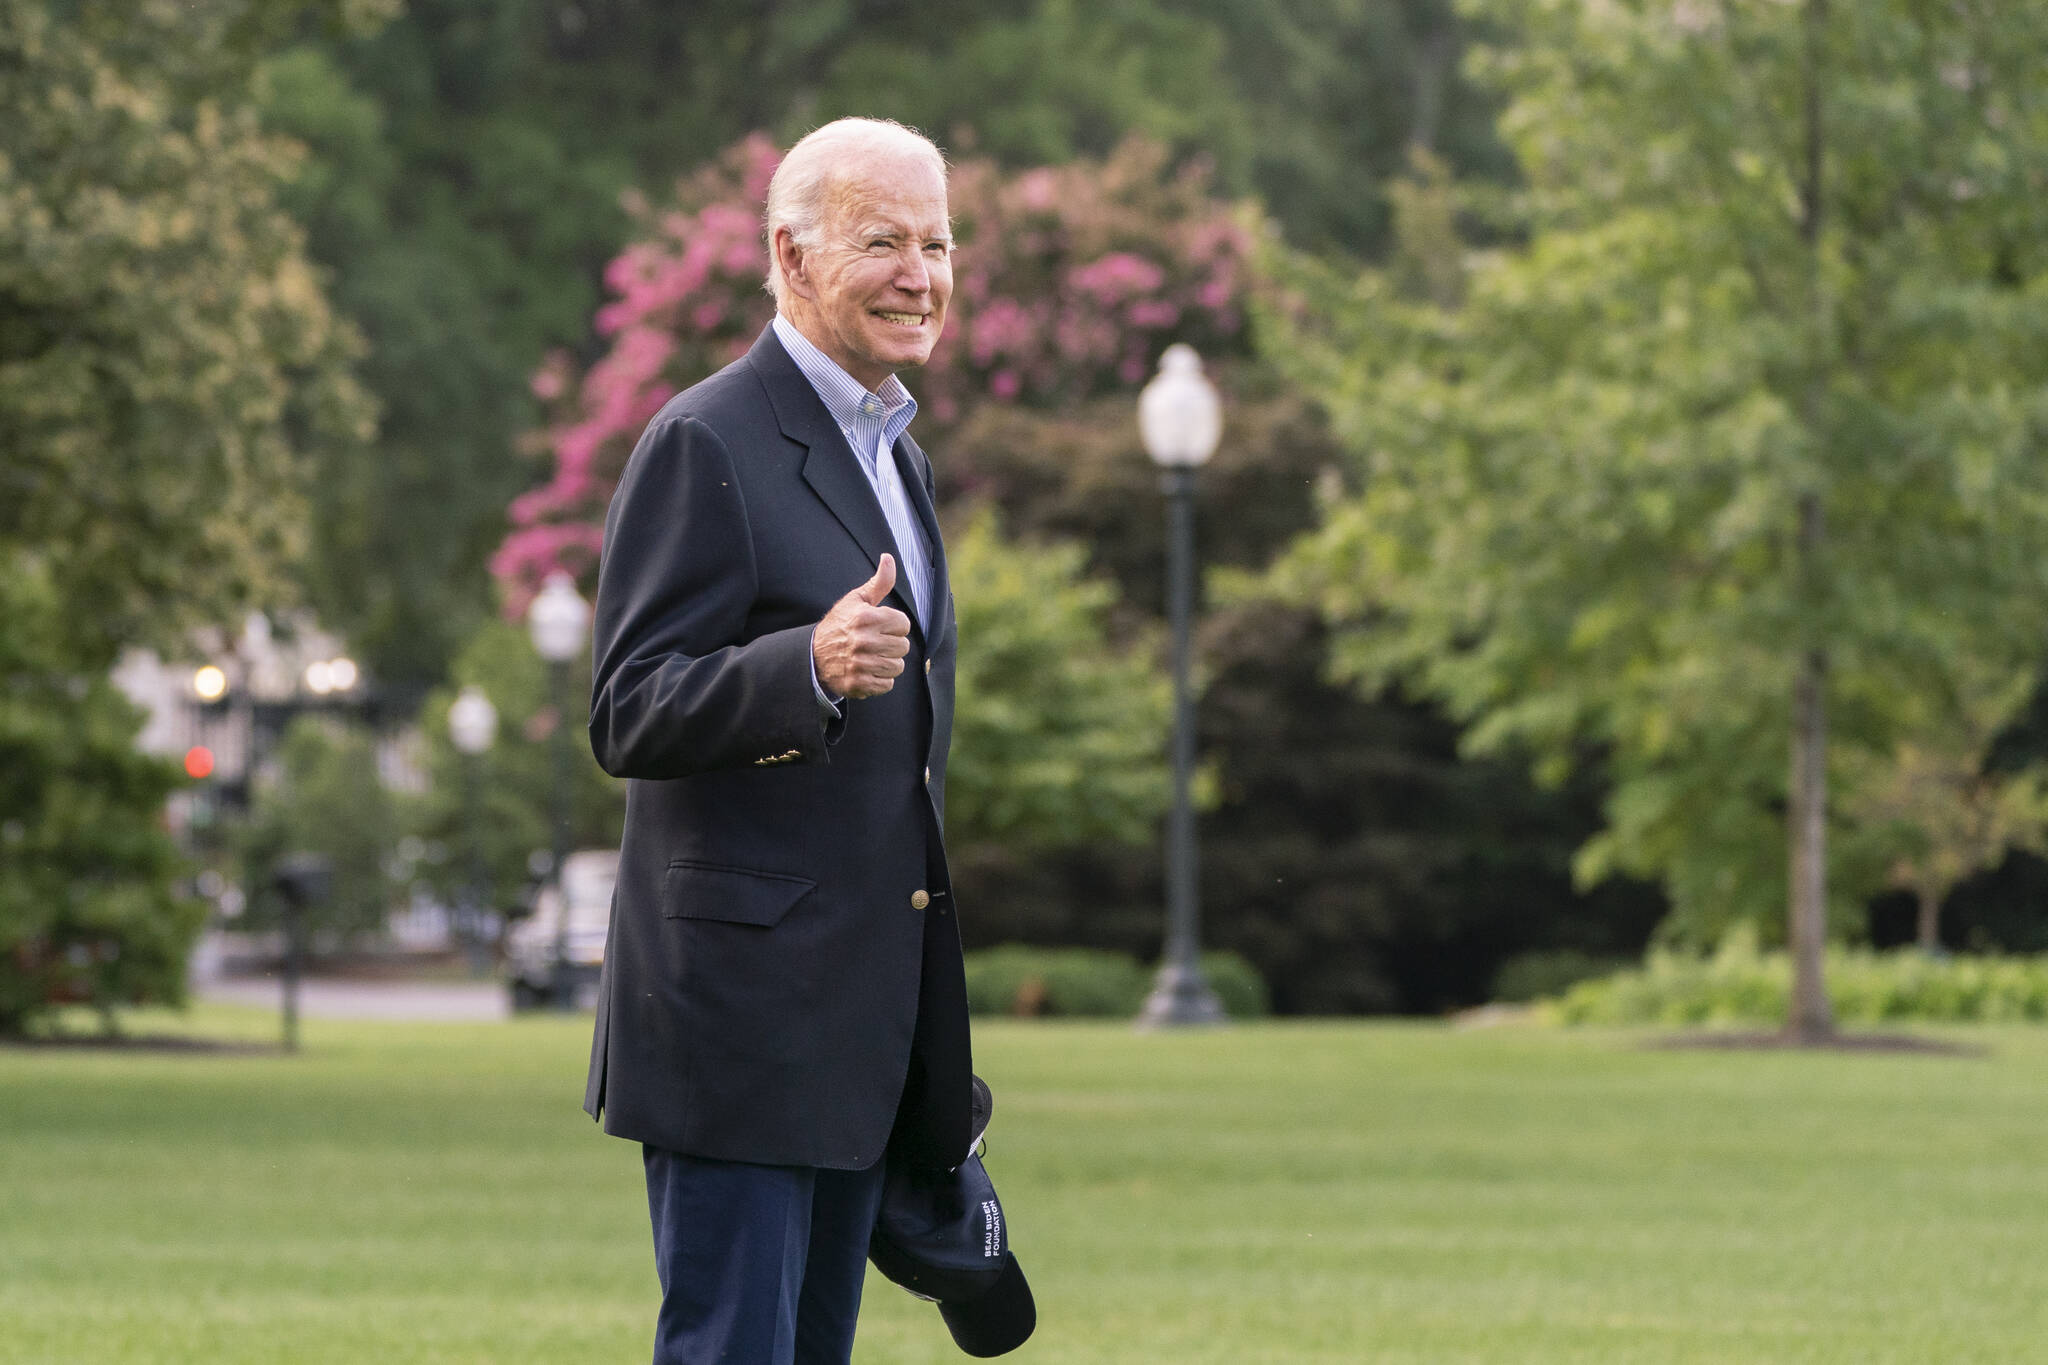 President Joe Biden walks to board Marine One on the South Lawn of the White House in Washington, on his way to his Rehoboth Beach, Del., home after his most recent COVID-19 isolation, Sunday, Aug. 7, 2022. (AP Photo / Manuel Balce Ceneta)